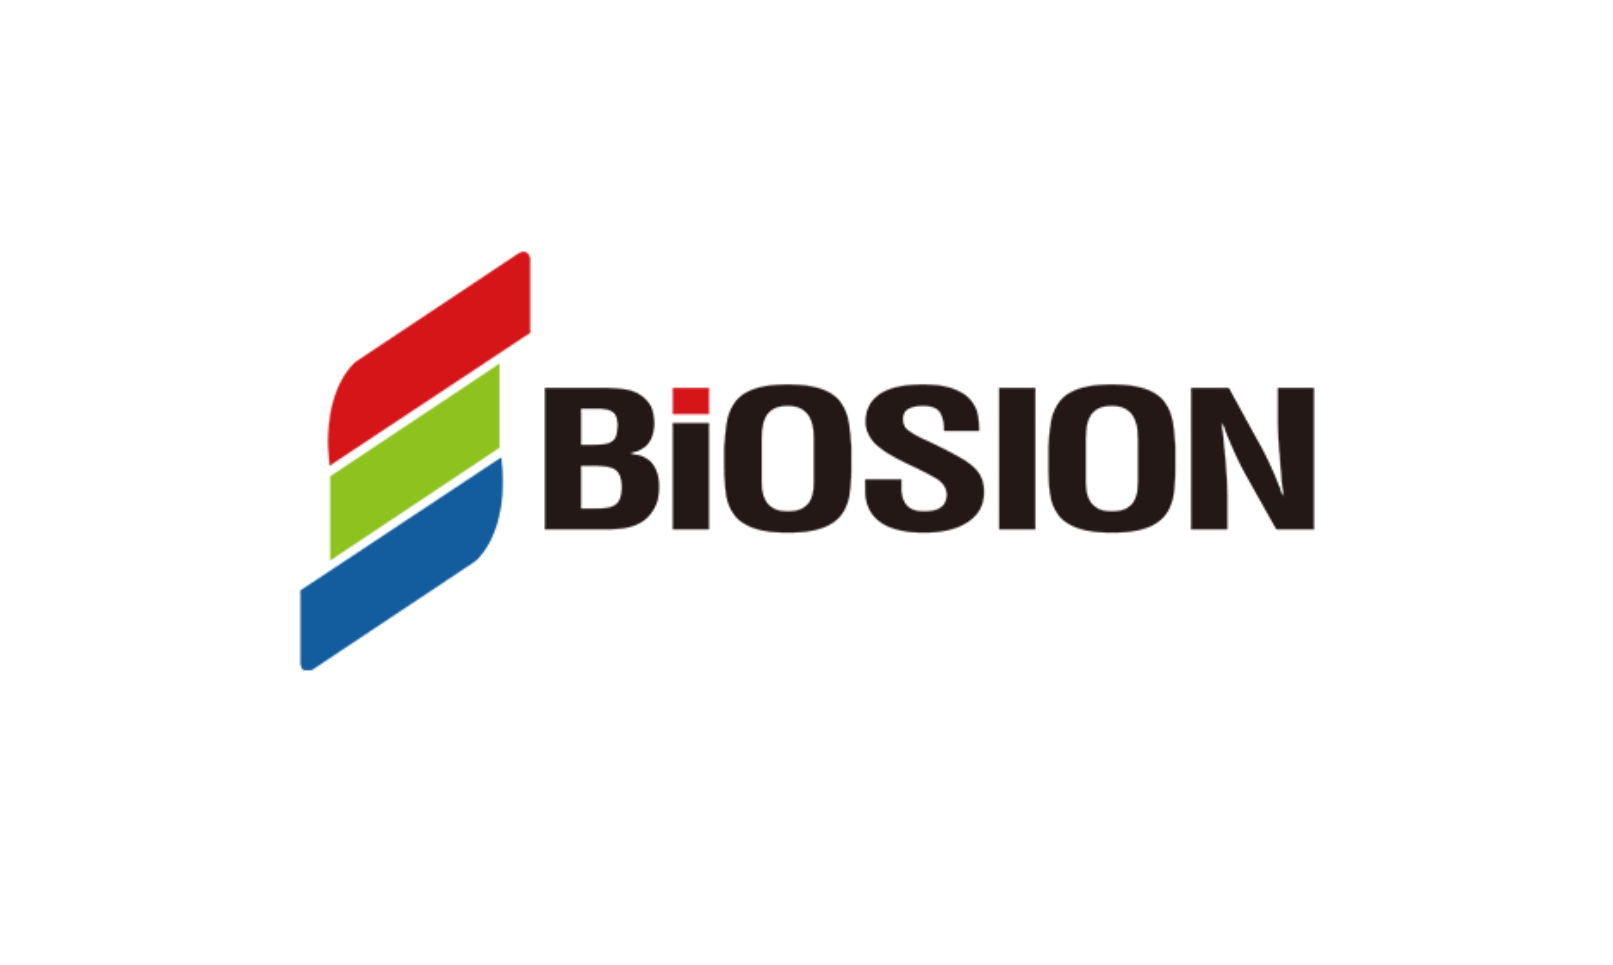 Biosion bispecific antibody therapies to be featured at the American Association for Cancer Research (AACR) annual meeting 2023